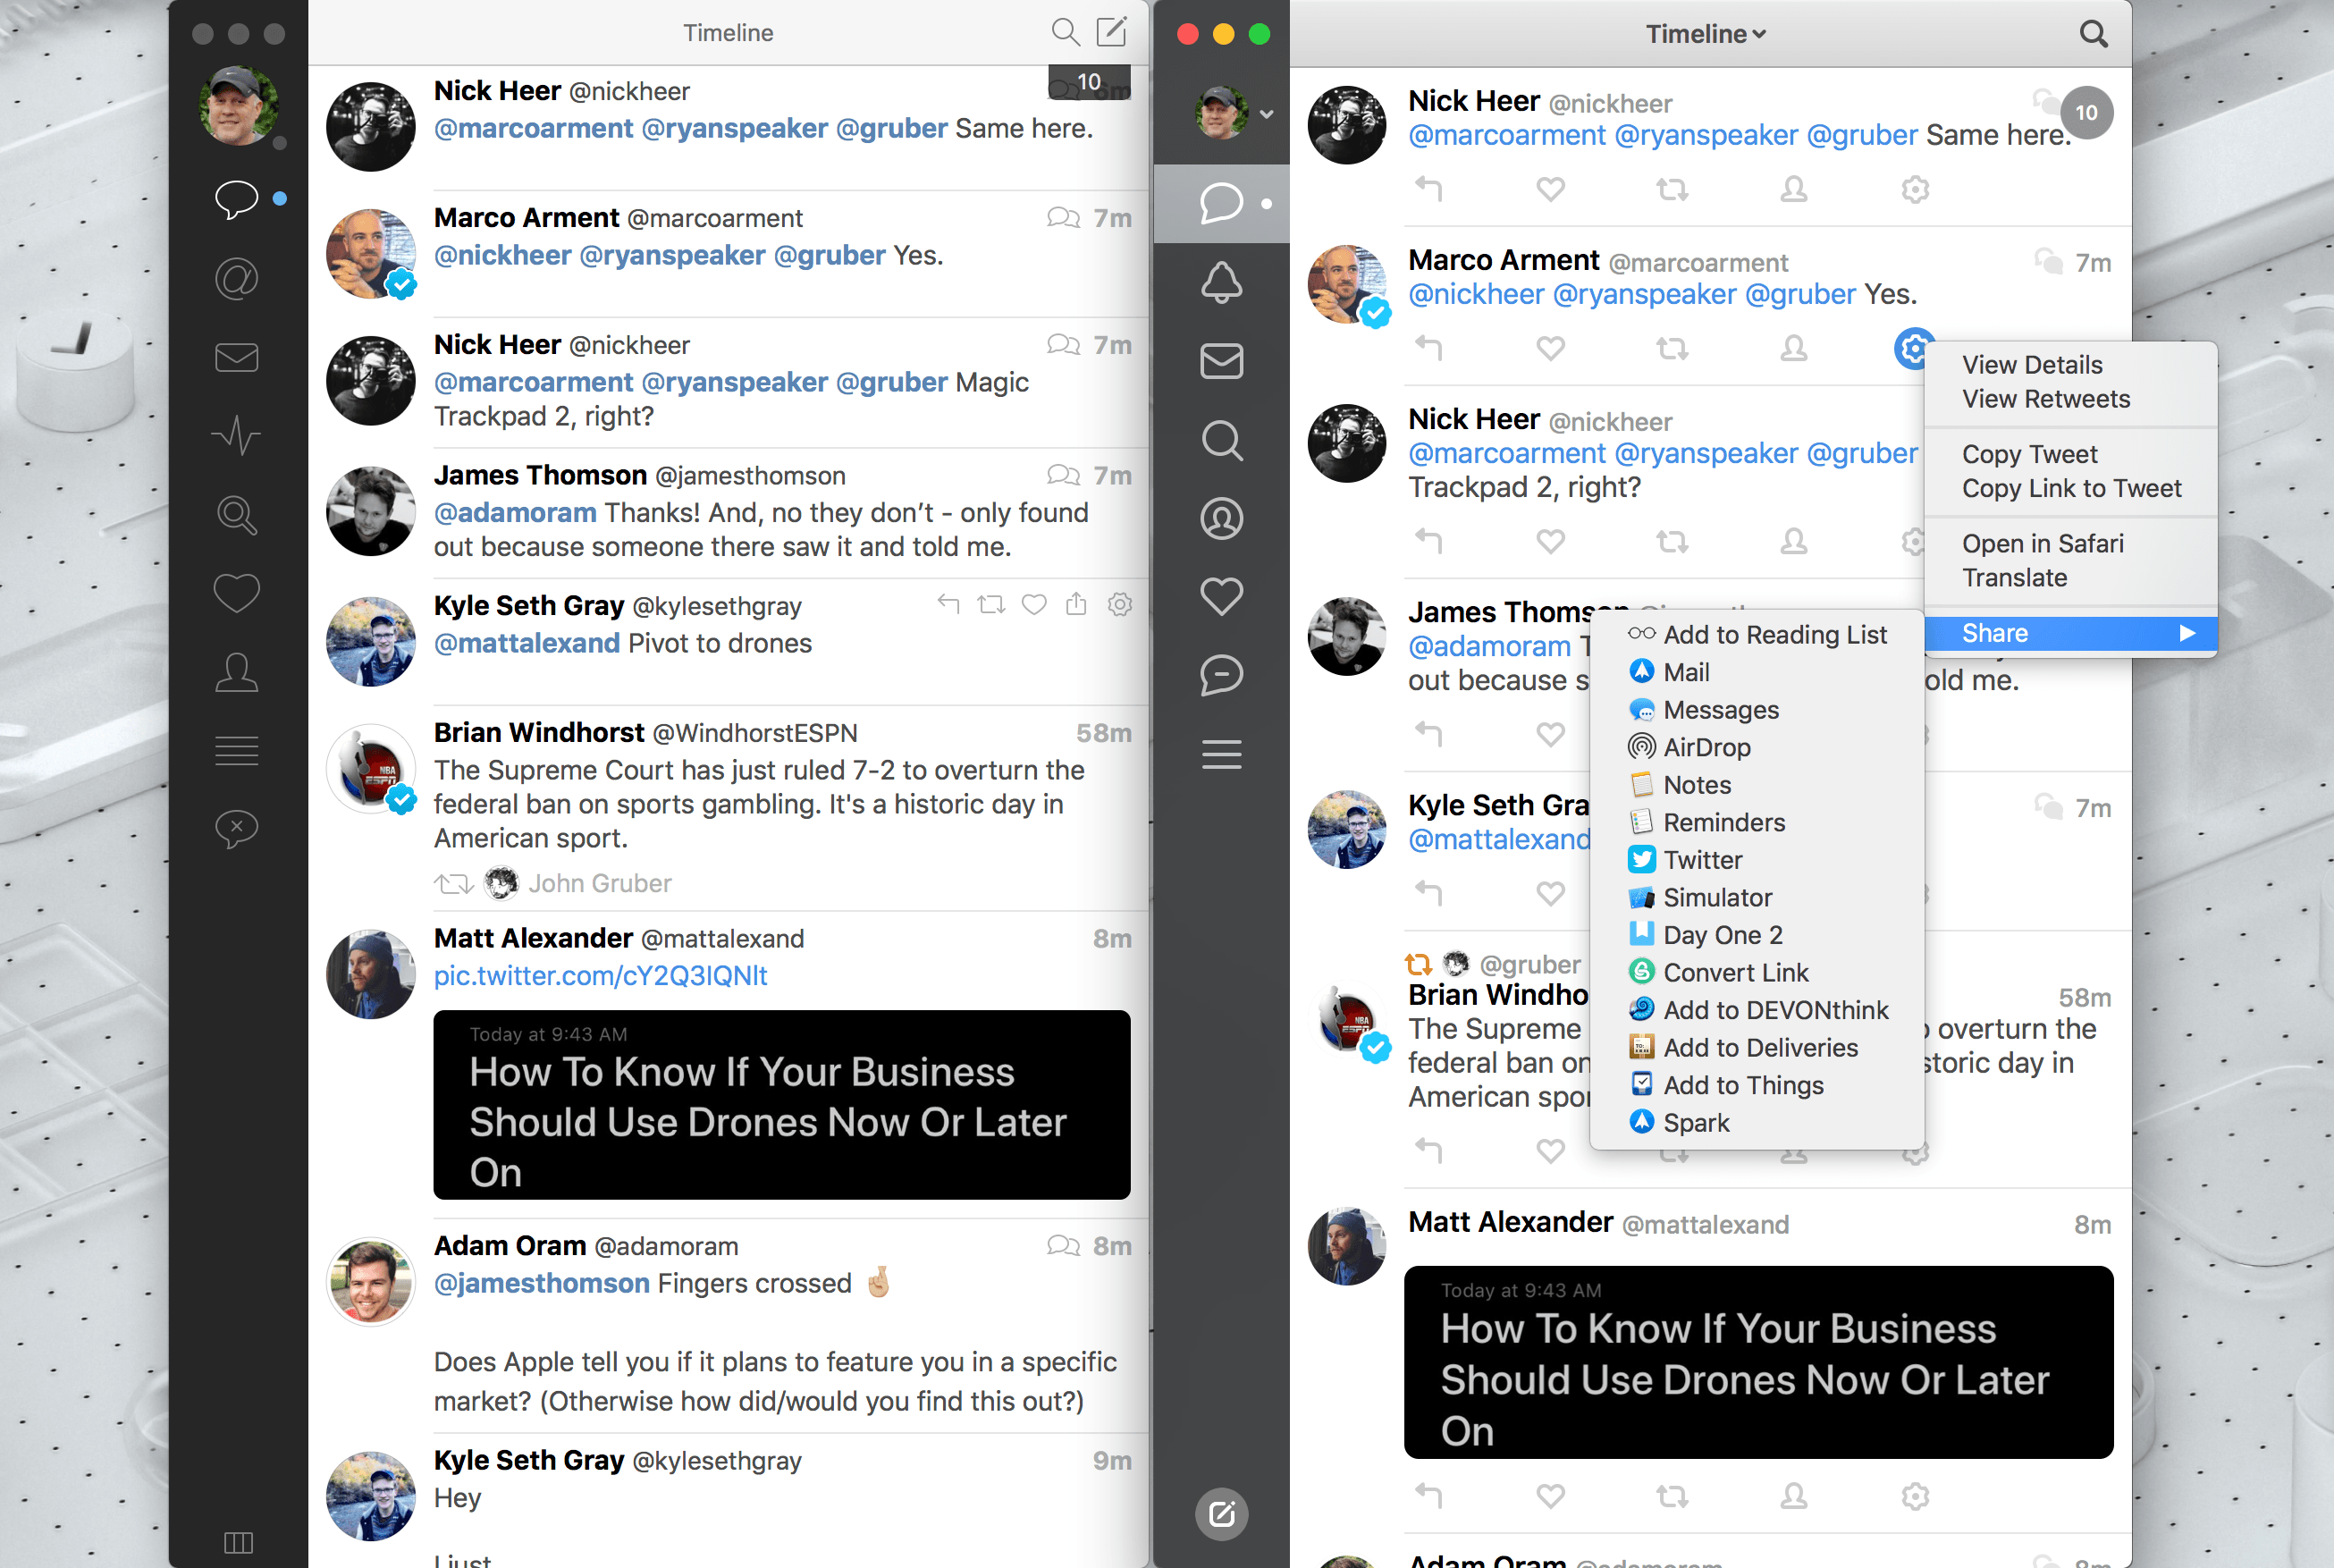 Tweetbot 3 (right) has share extension support via each tweet's gear button.